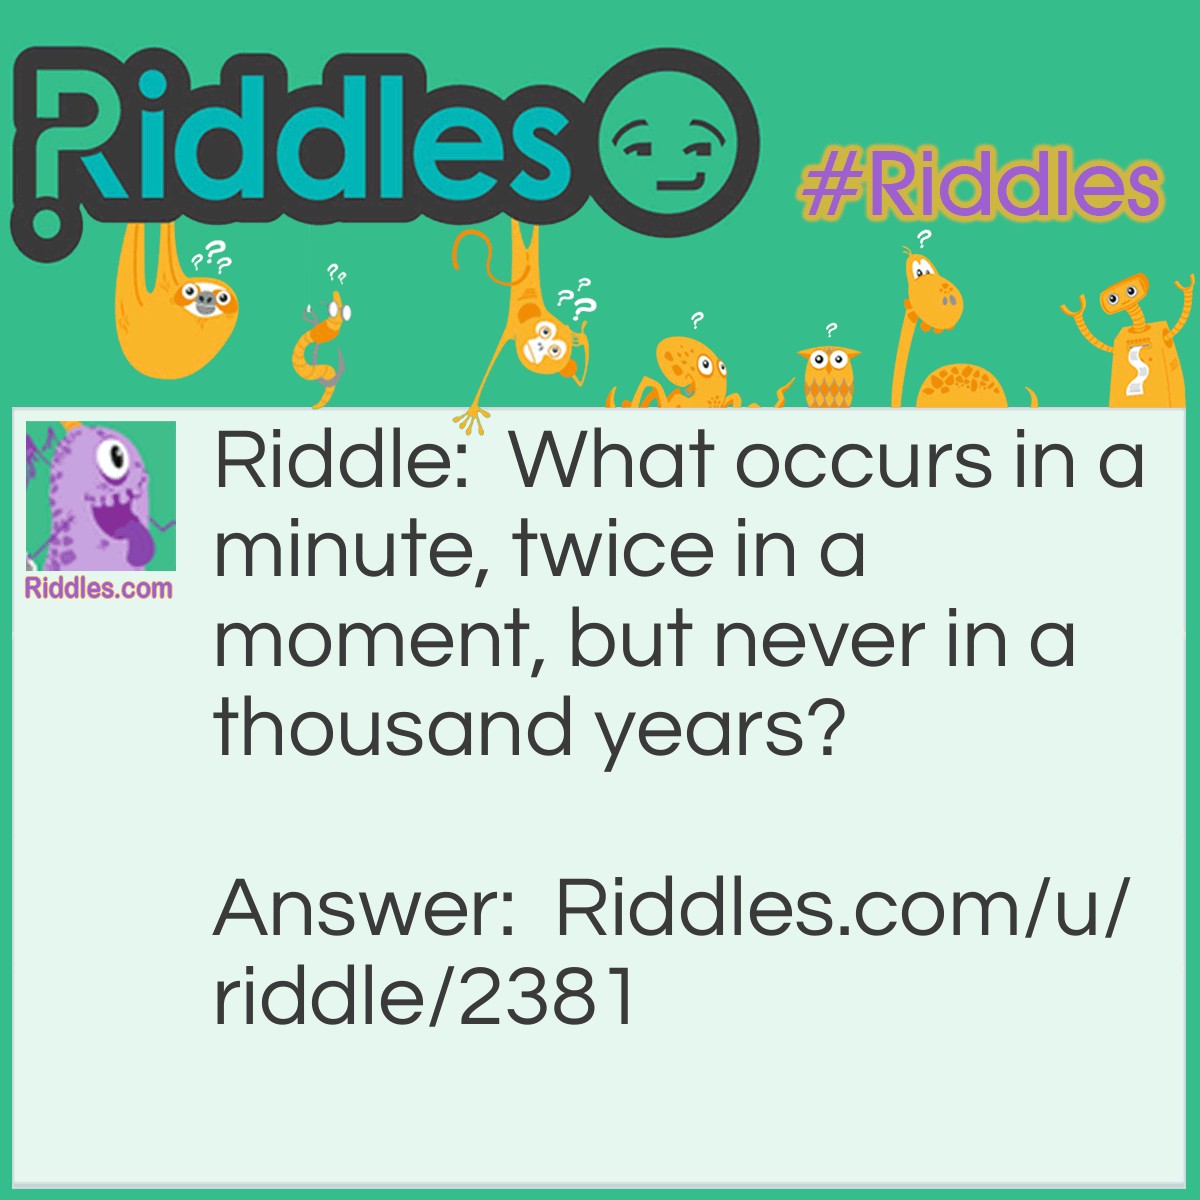 Riddle: What occurs in a minute, twice in a moment, but never in a thousand years? Answer: The letter M. (I know, pretty easy)